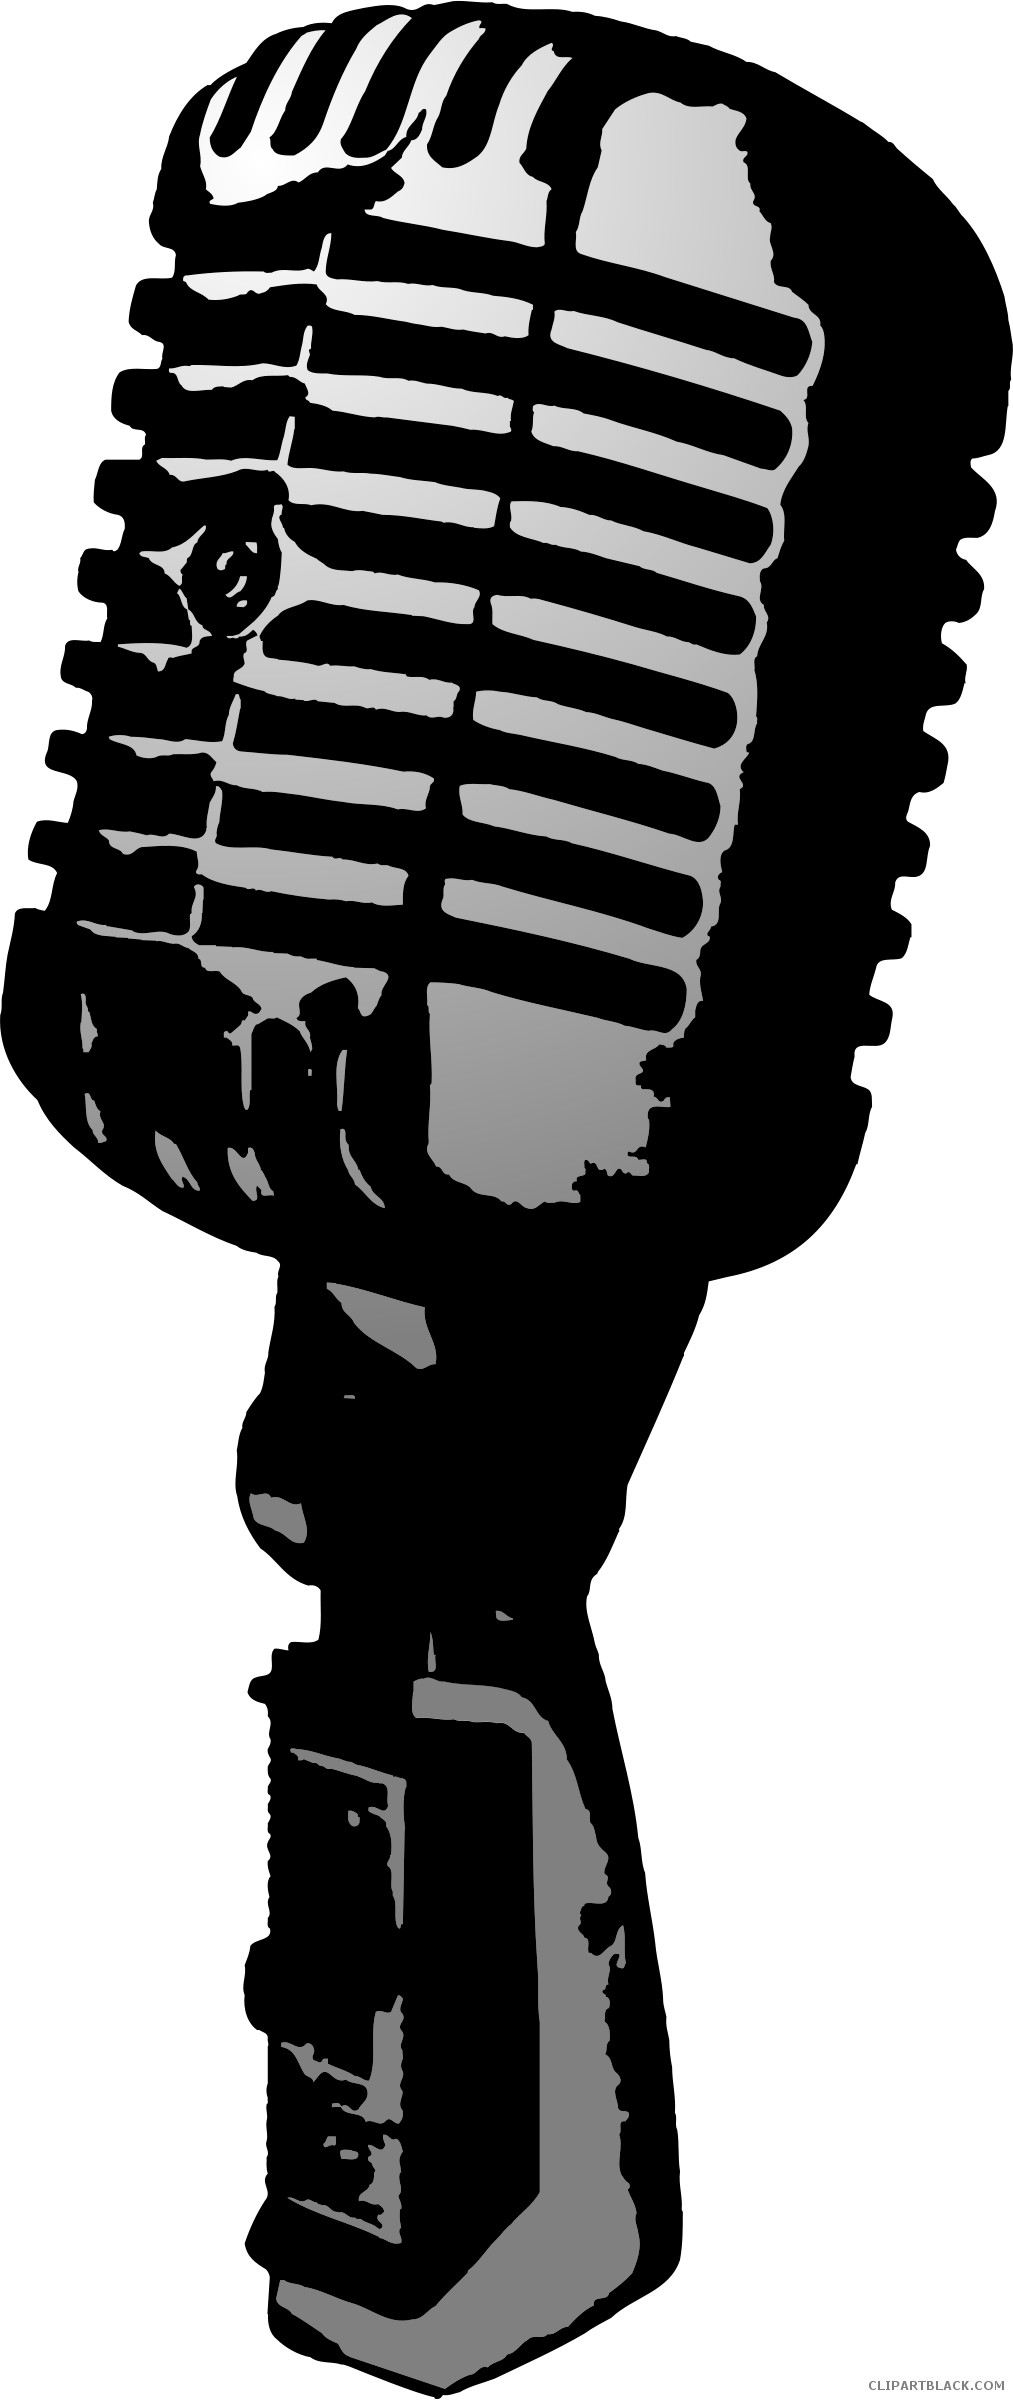 Microphone clipart old.